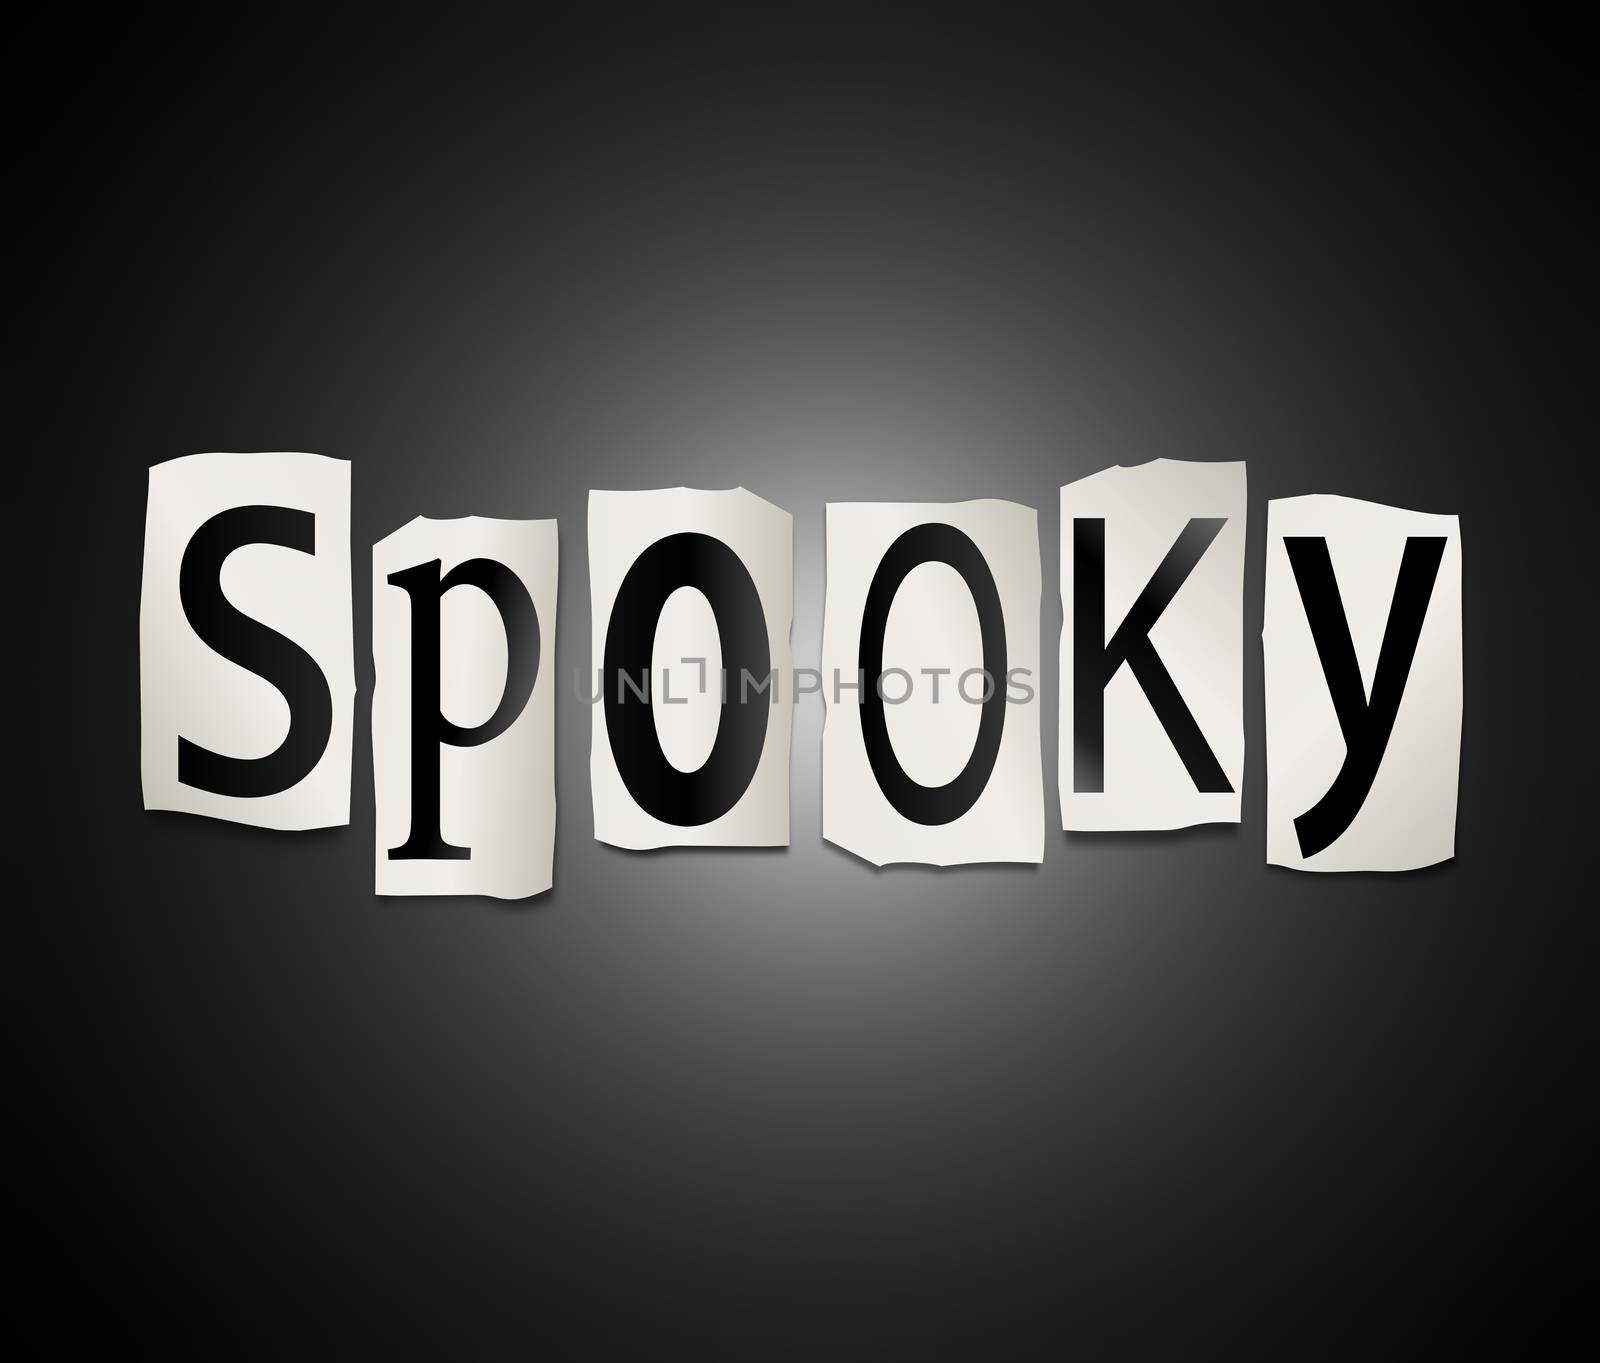 Illustration depicting a set of cut out printed letters arranged to form the word spooky.